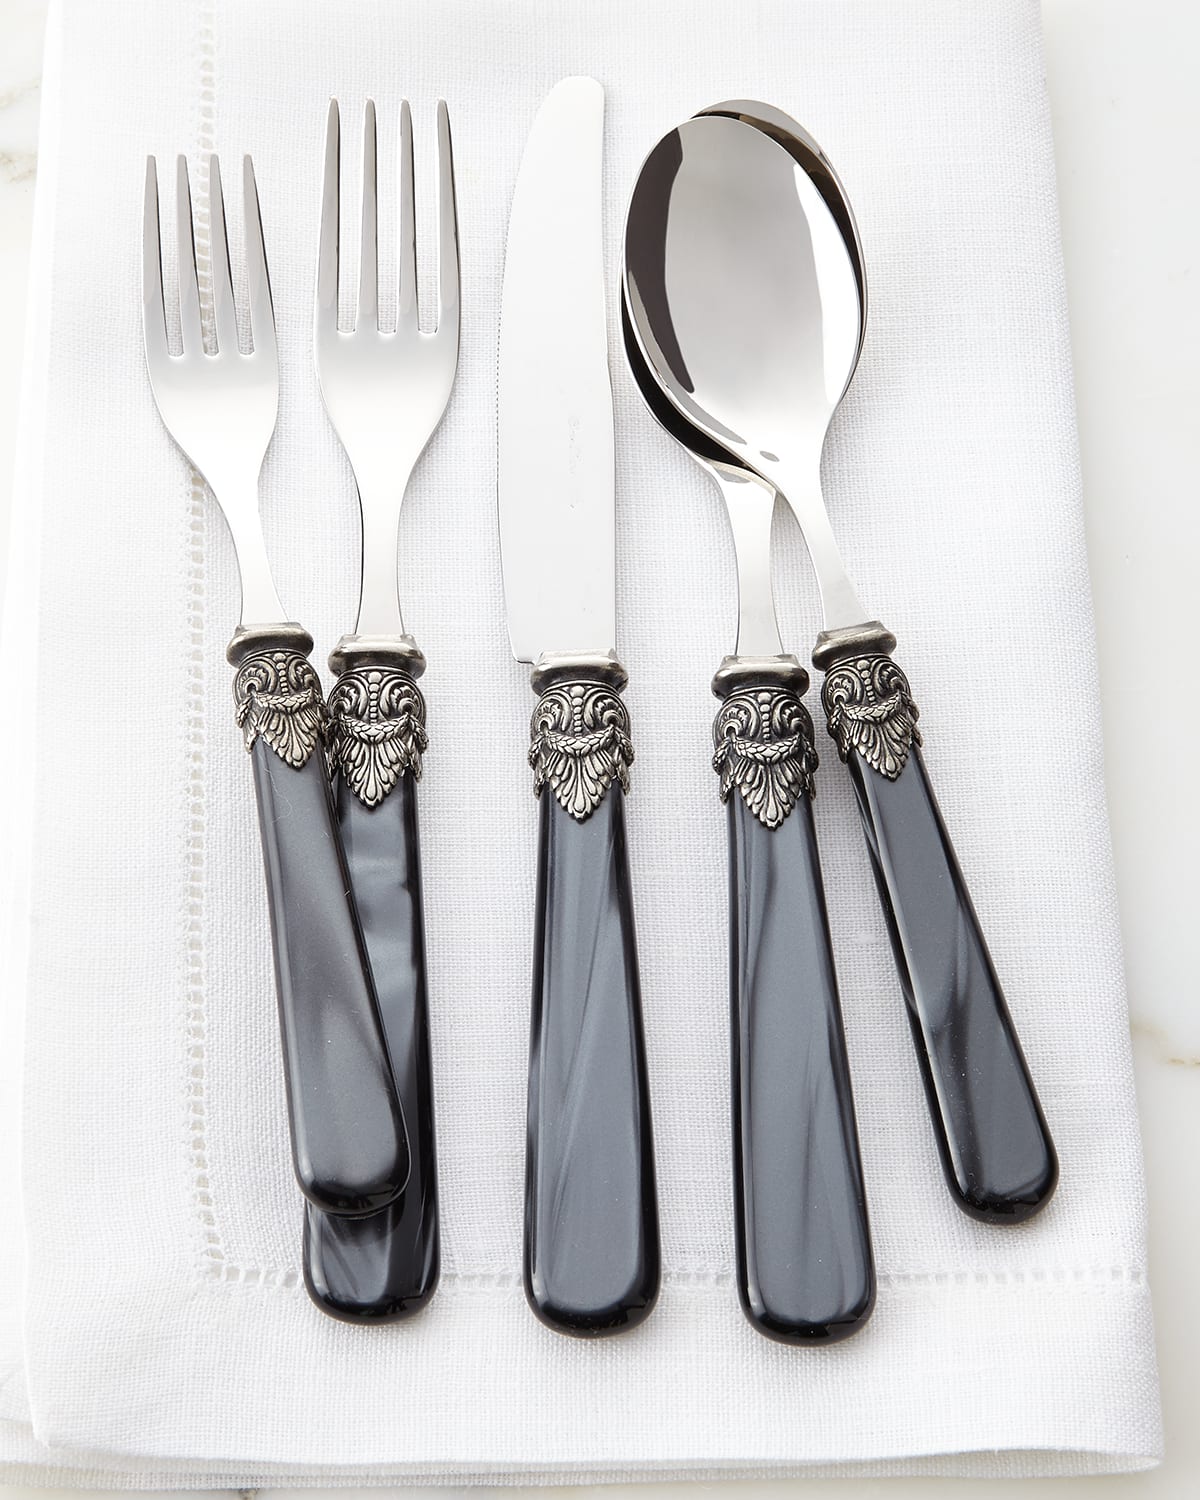 Lou Laguiole Tradition 24pc Flatware set, 18/0 Stainless Steel, Satin